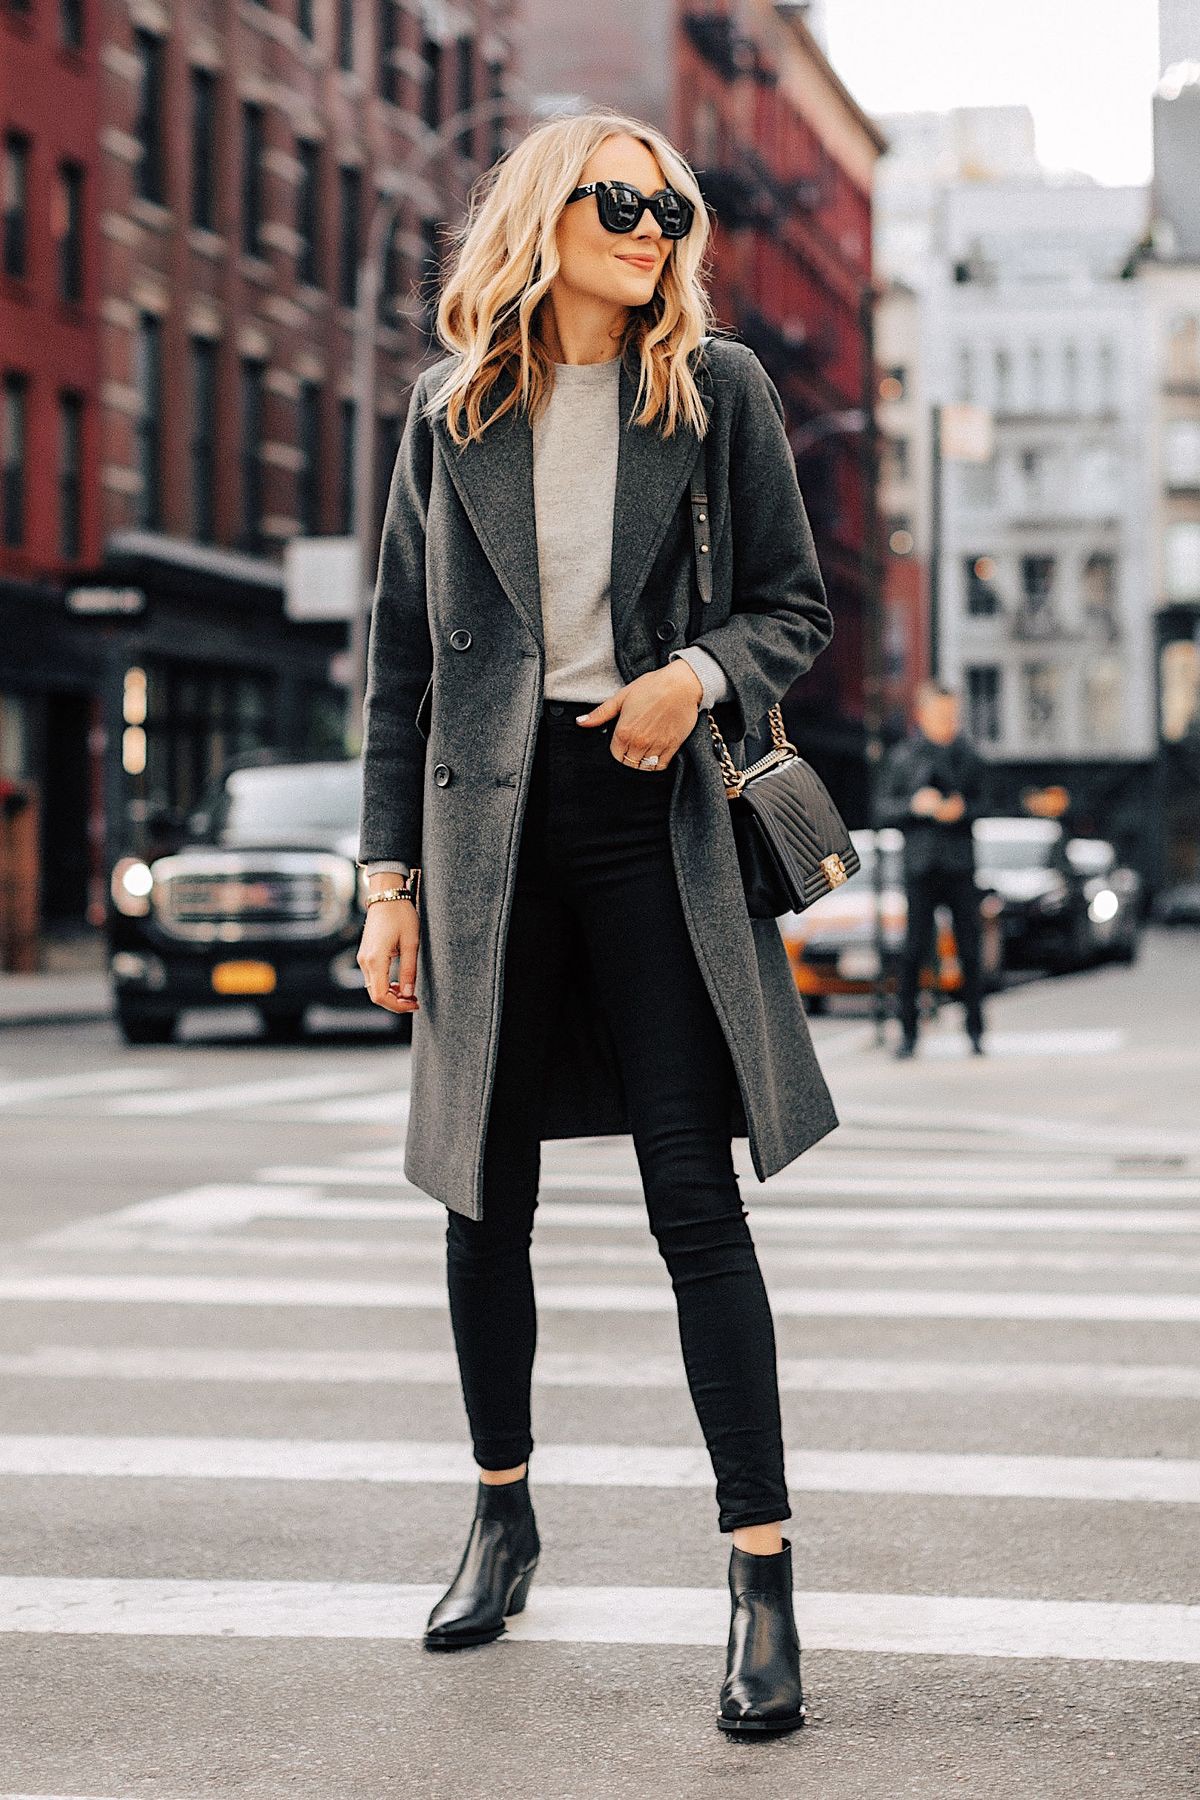 Colour outfit ideas 2020 everlane rewool overcoat slim fit pants, street fashion: Polo neck,  Street Style,  Classy Winter Dresses,  Wool Coat,  Winter Coat,  Slim-Fit Pants  